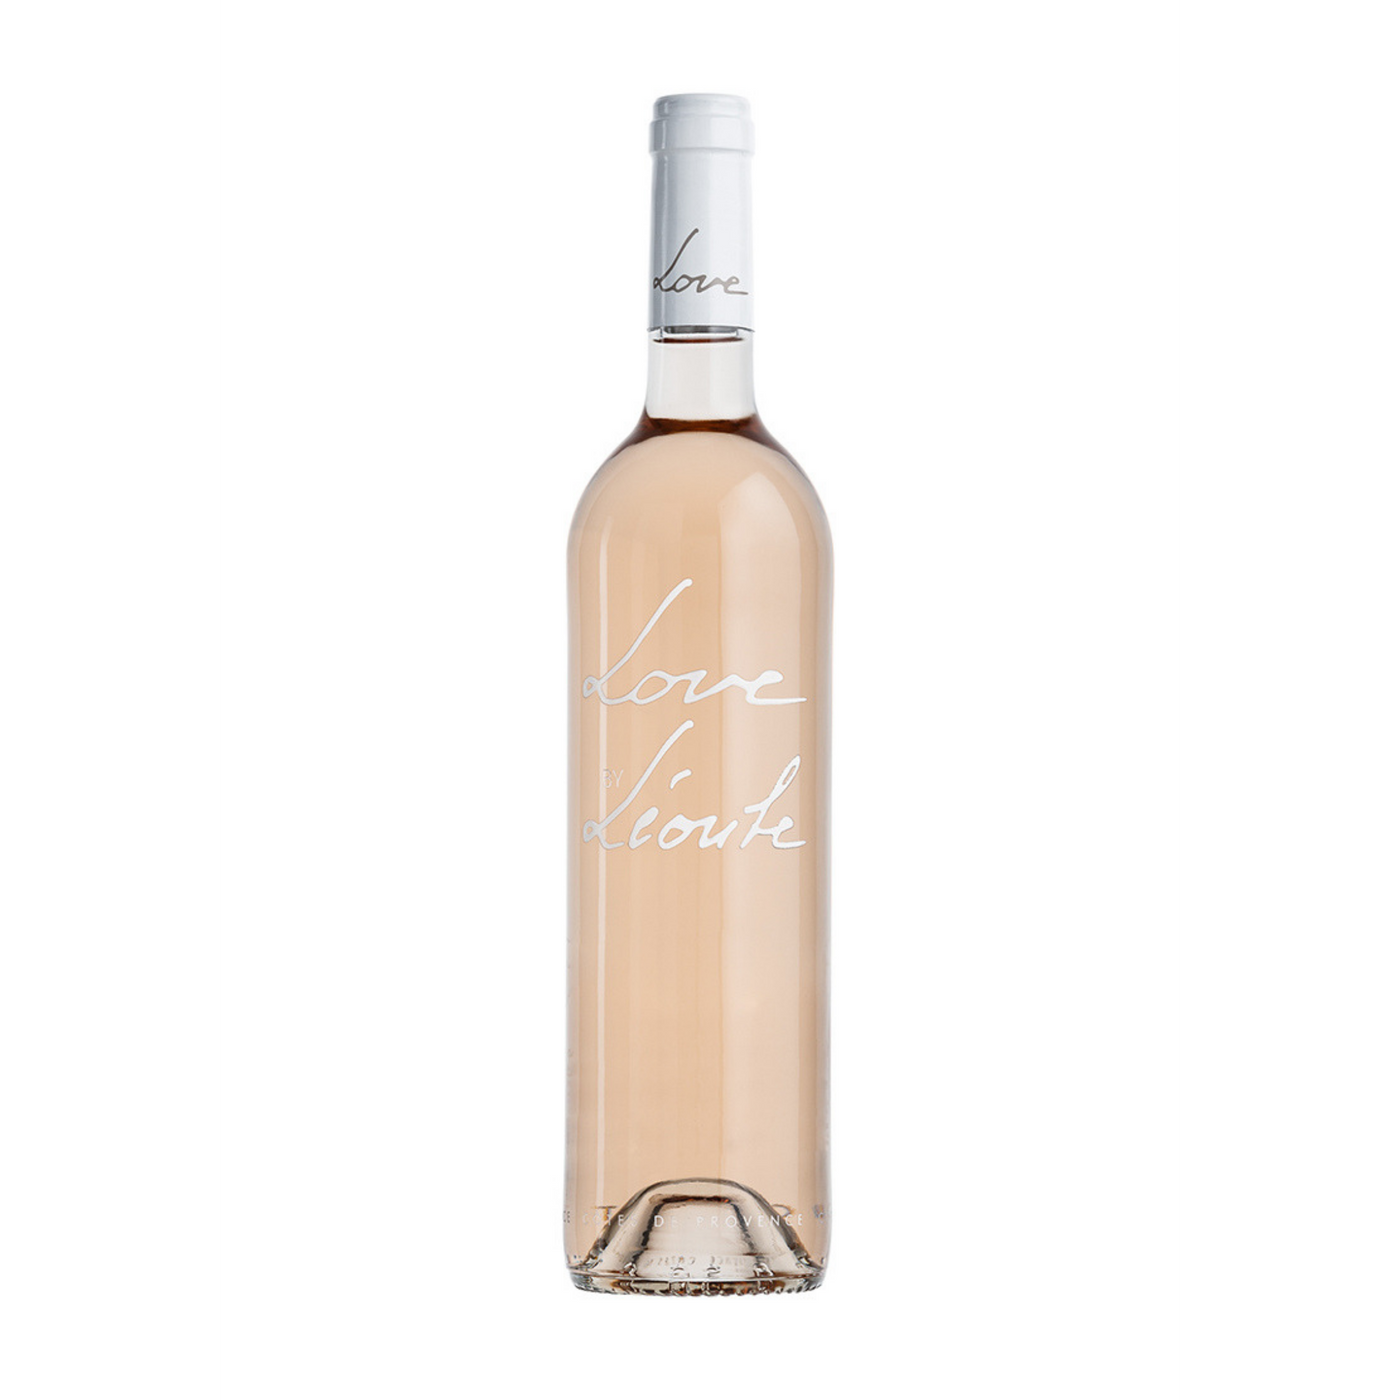 Love by Leoube Provence Ros?